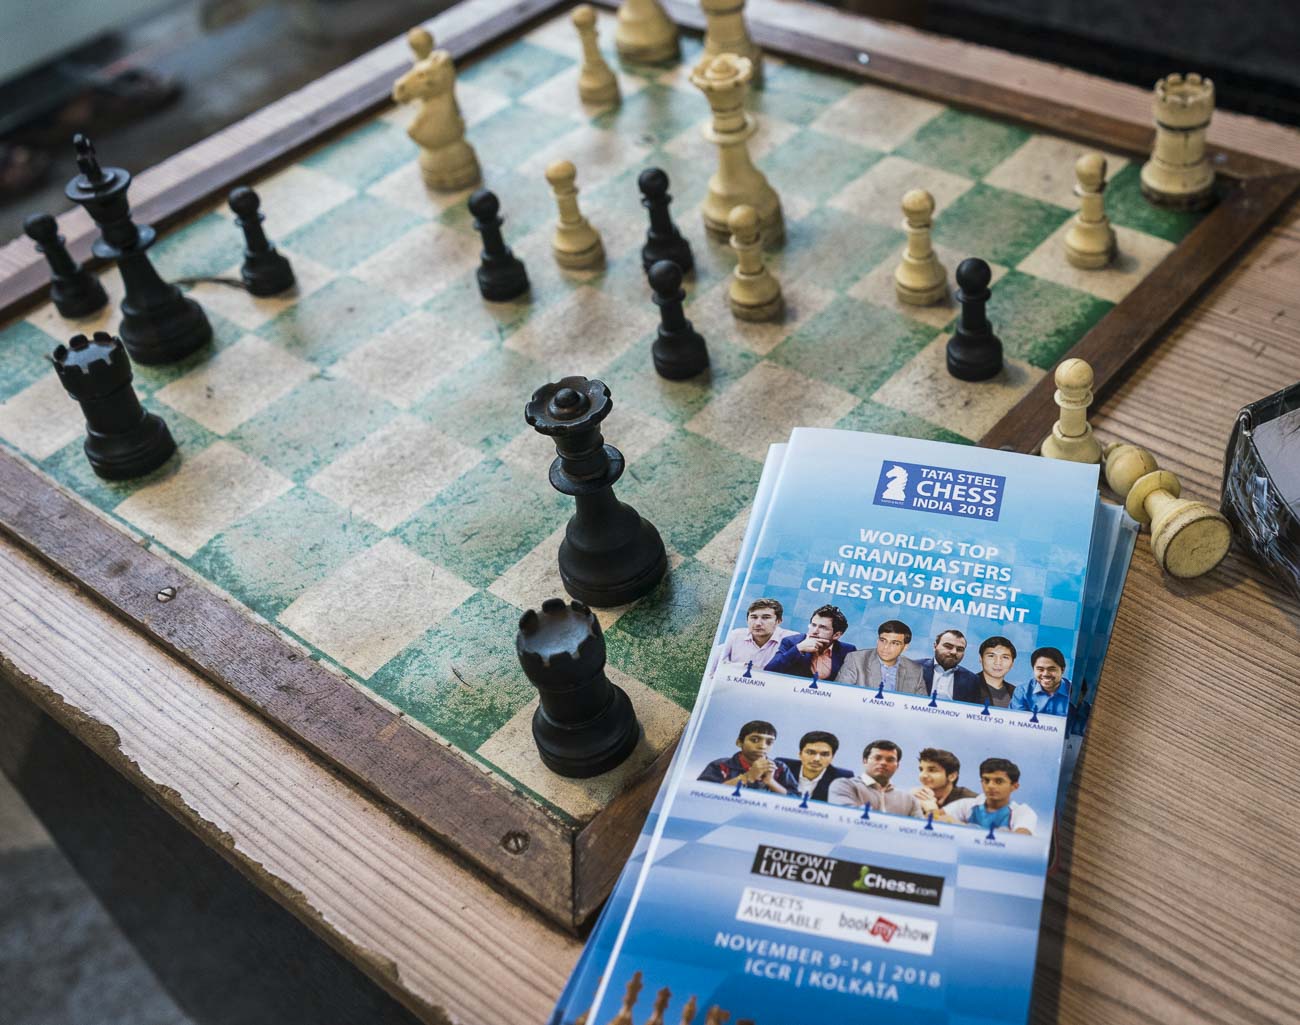 Tata Steel Chess on X: ♟ Chess on Tour ✓, what a day! So many chess fans  came to watch the Masters, live commentary and have a good time! Now it's  time